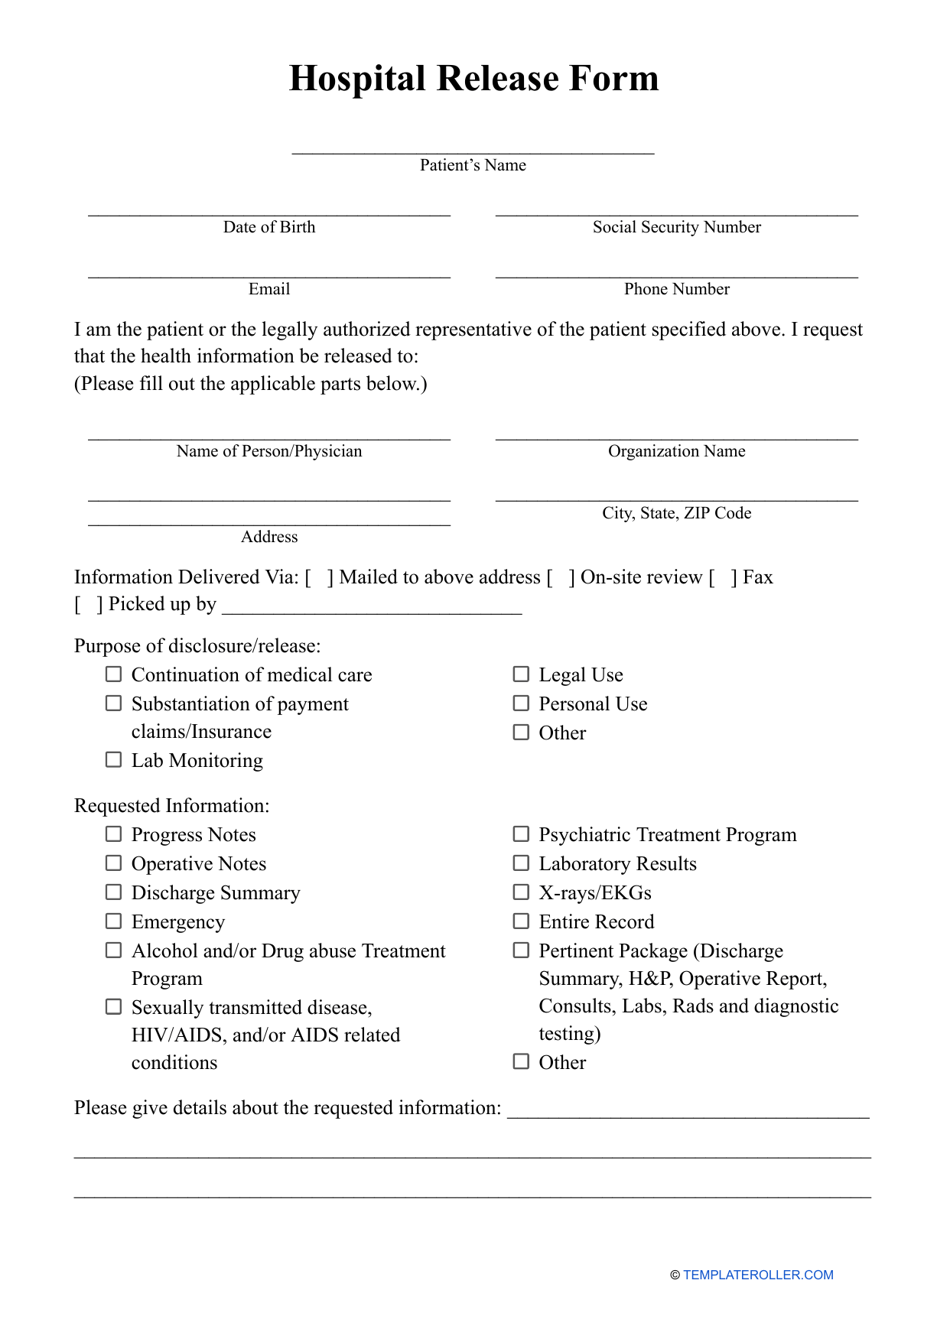 Hospital Release Form, Page 1